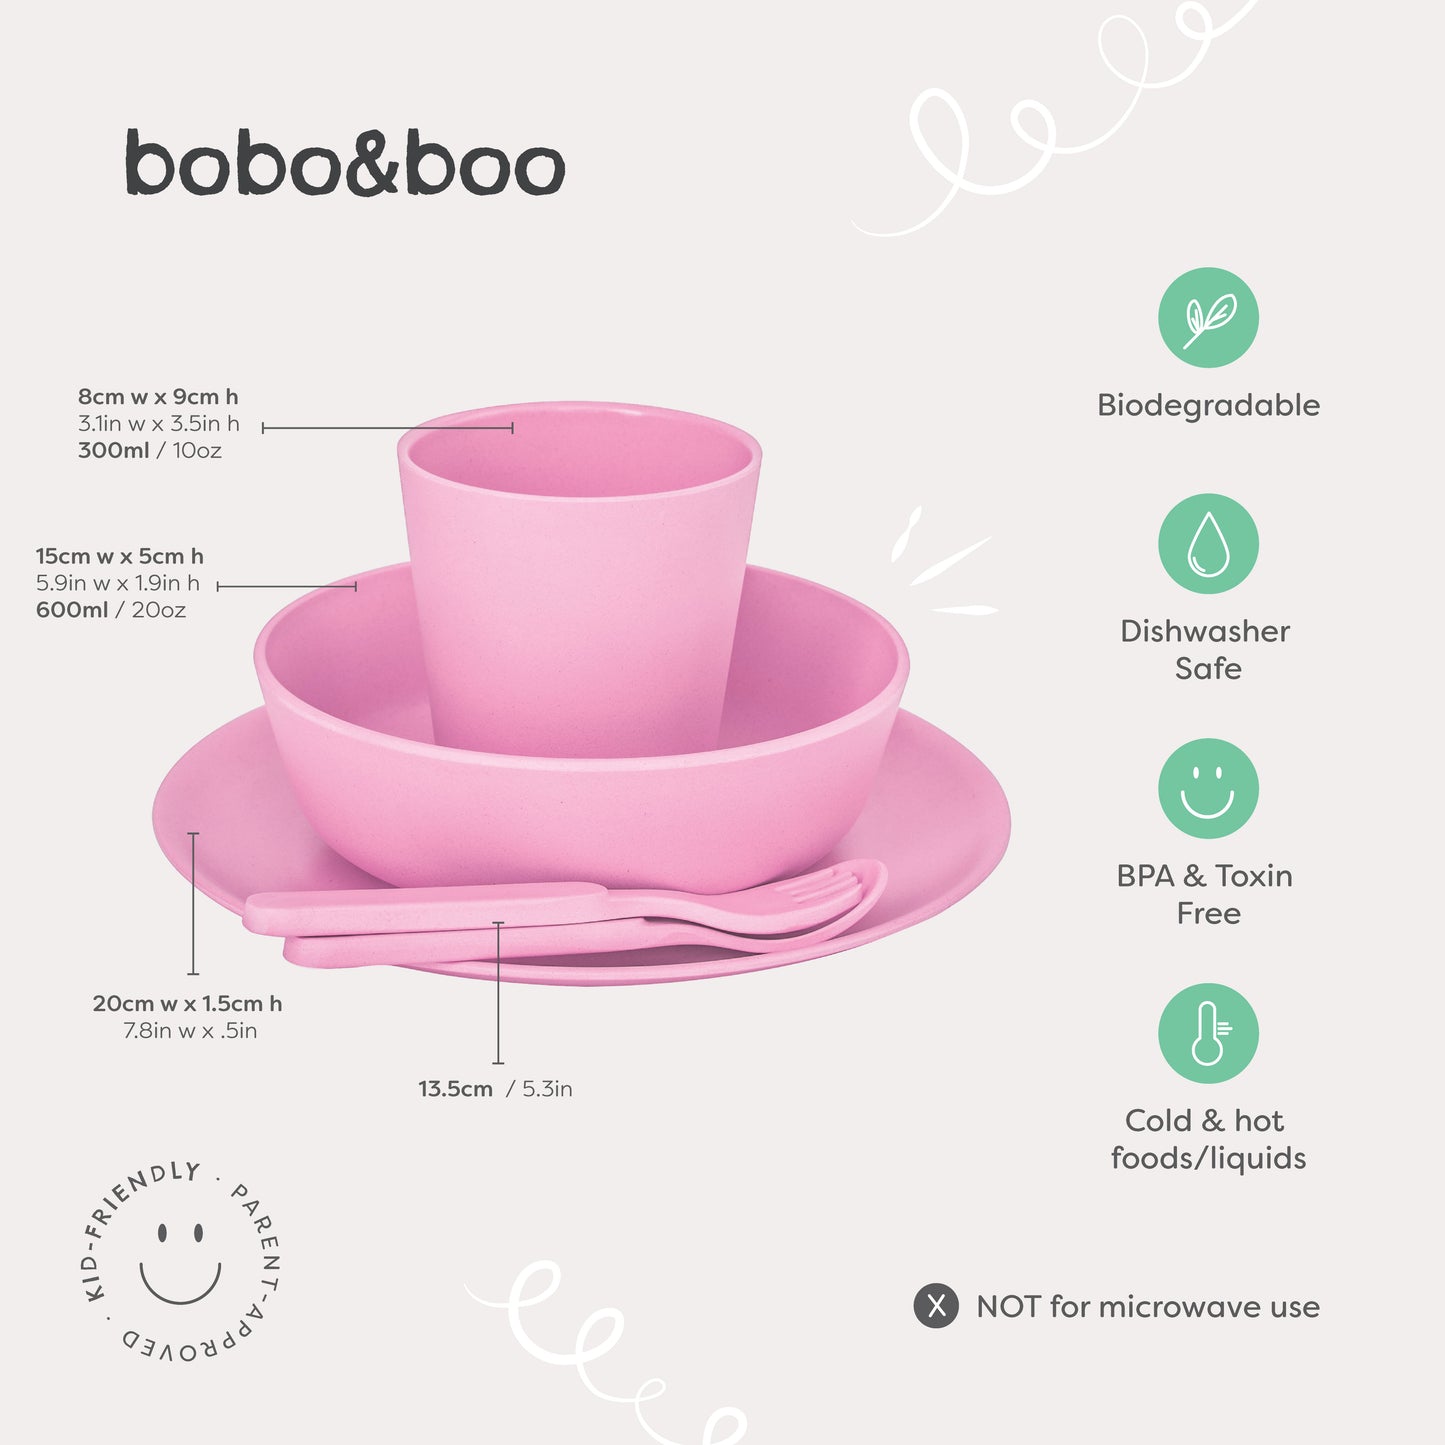 Bobo & Boo bamboo pink dinnerwear set with product measurements